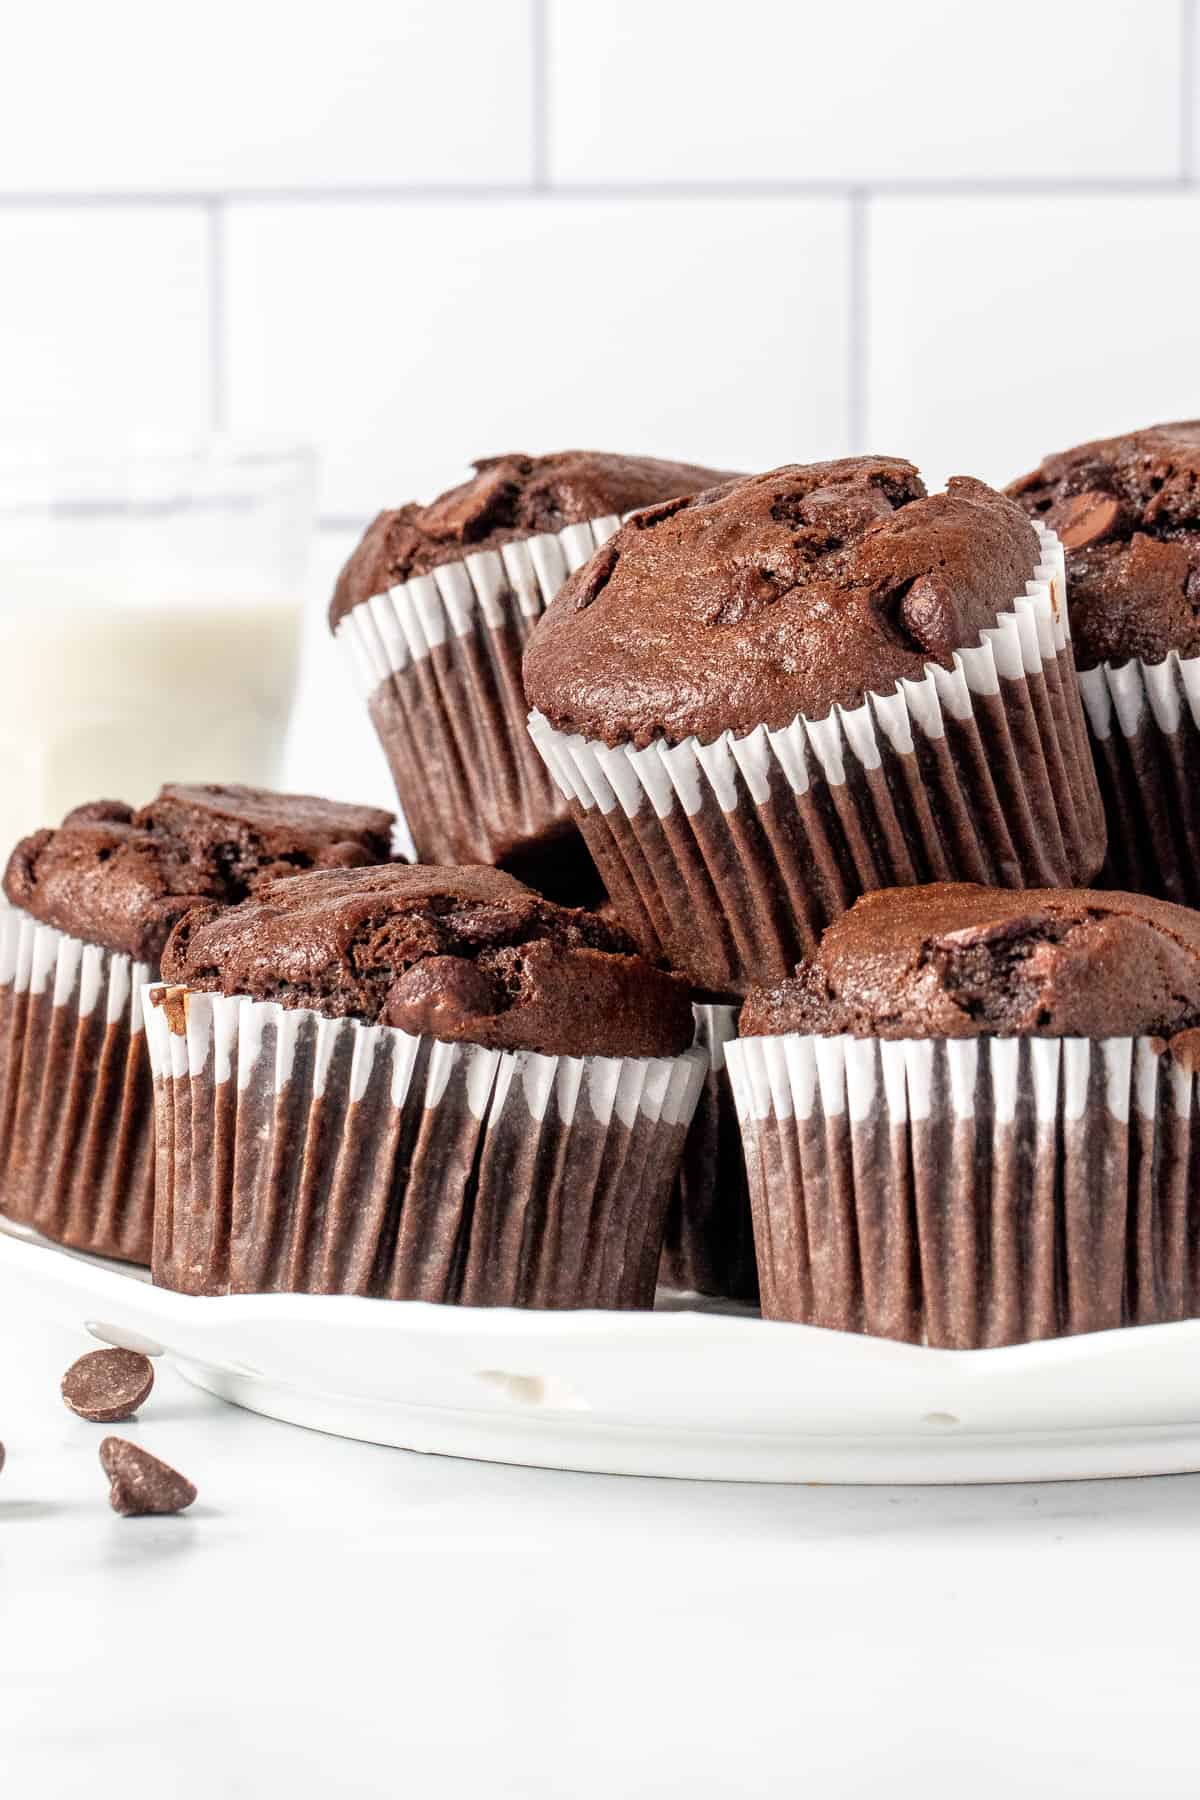 Plate of chocolate muffins